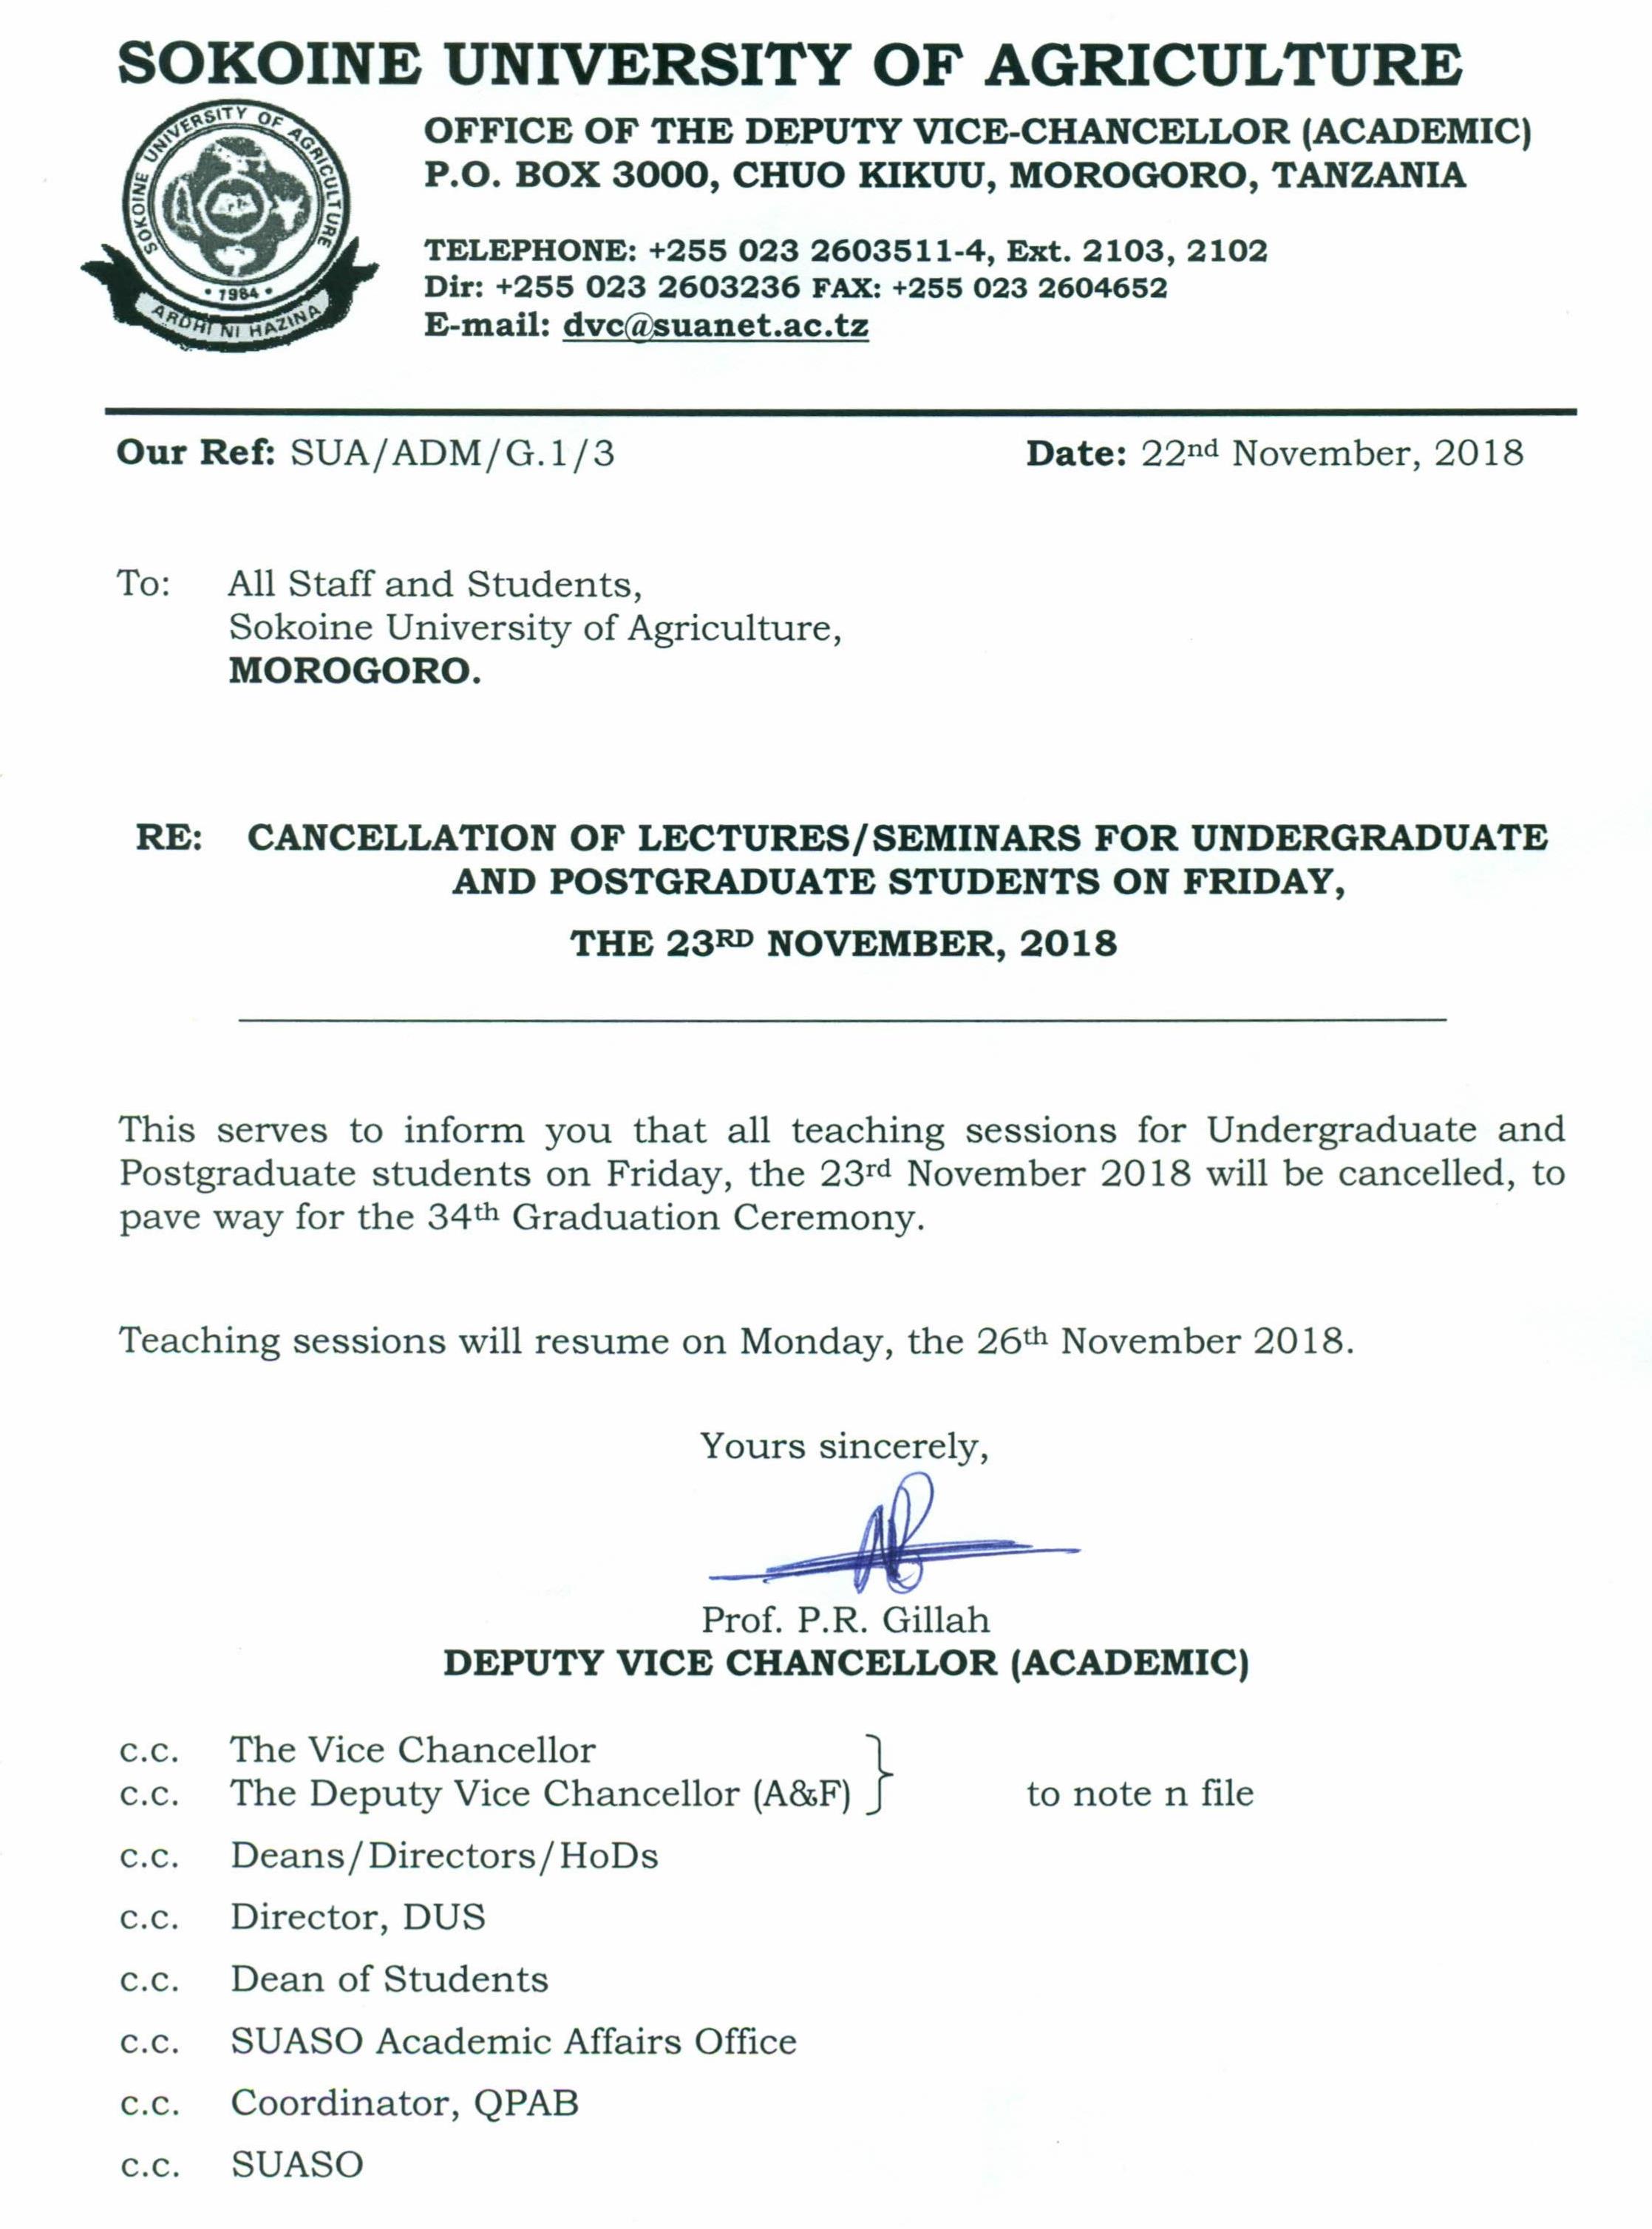 cancellation of lectures